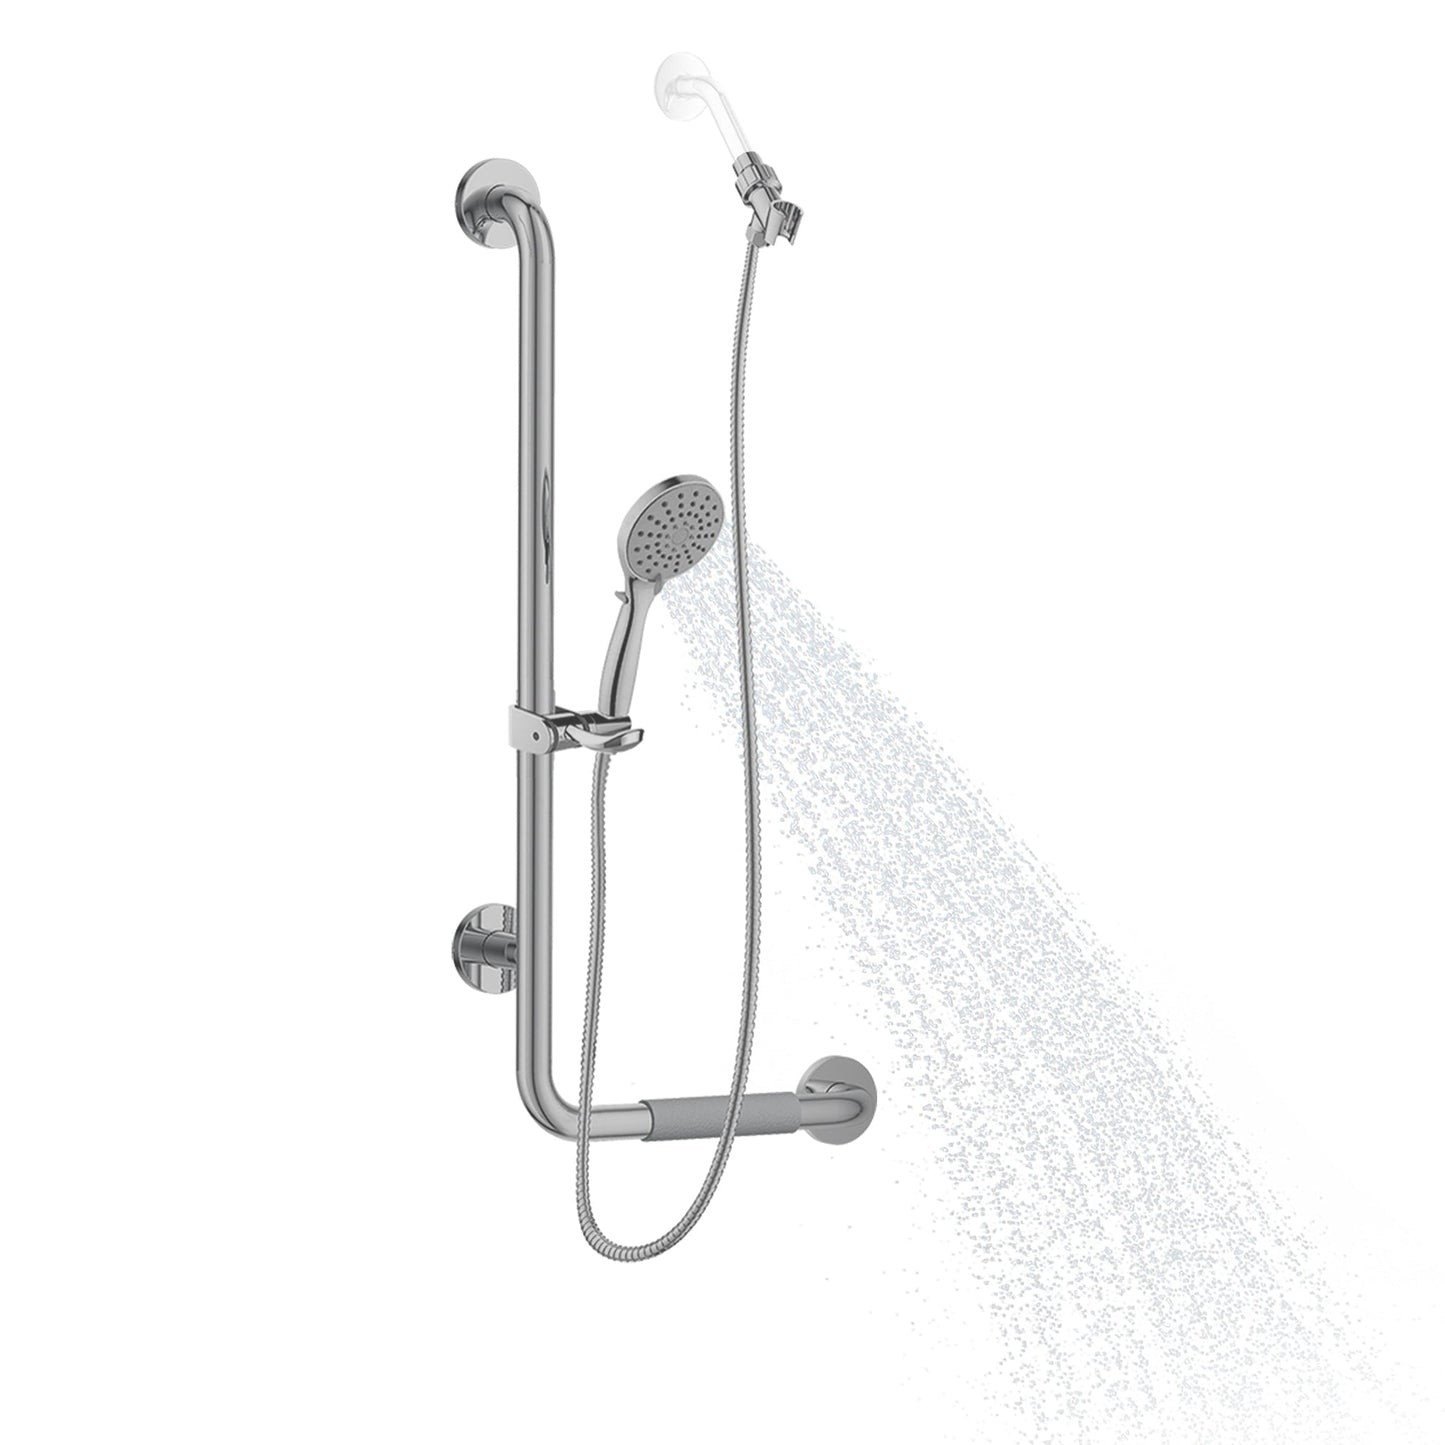 PULSE ShowerSpas Ergo Slide Bar and Grab Bar Left Installation in Brushed Stainless Steel Finish With Multi Function Hand Shower